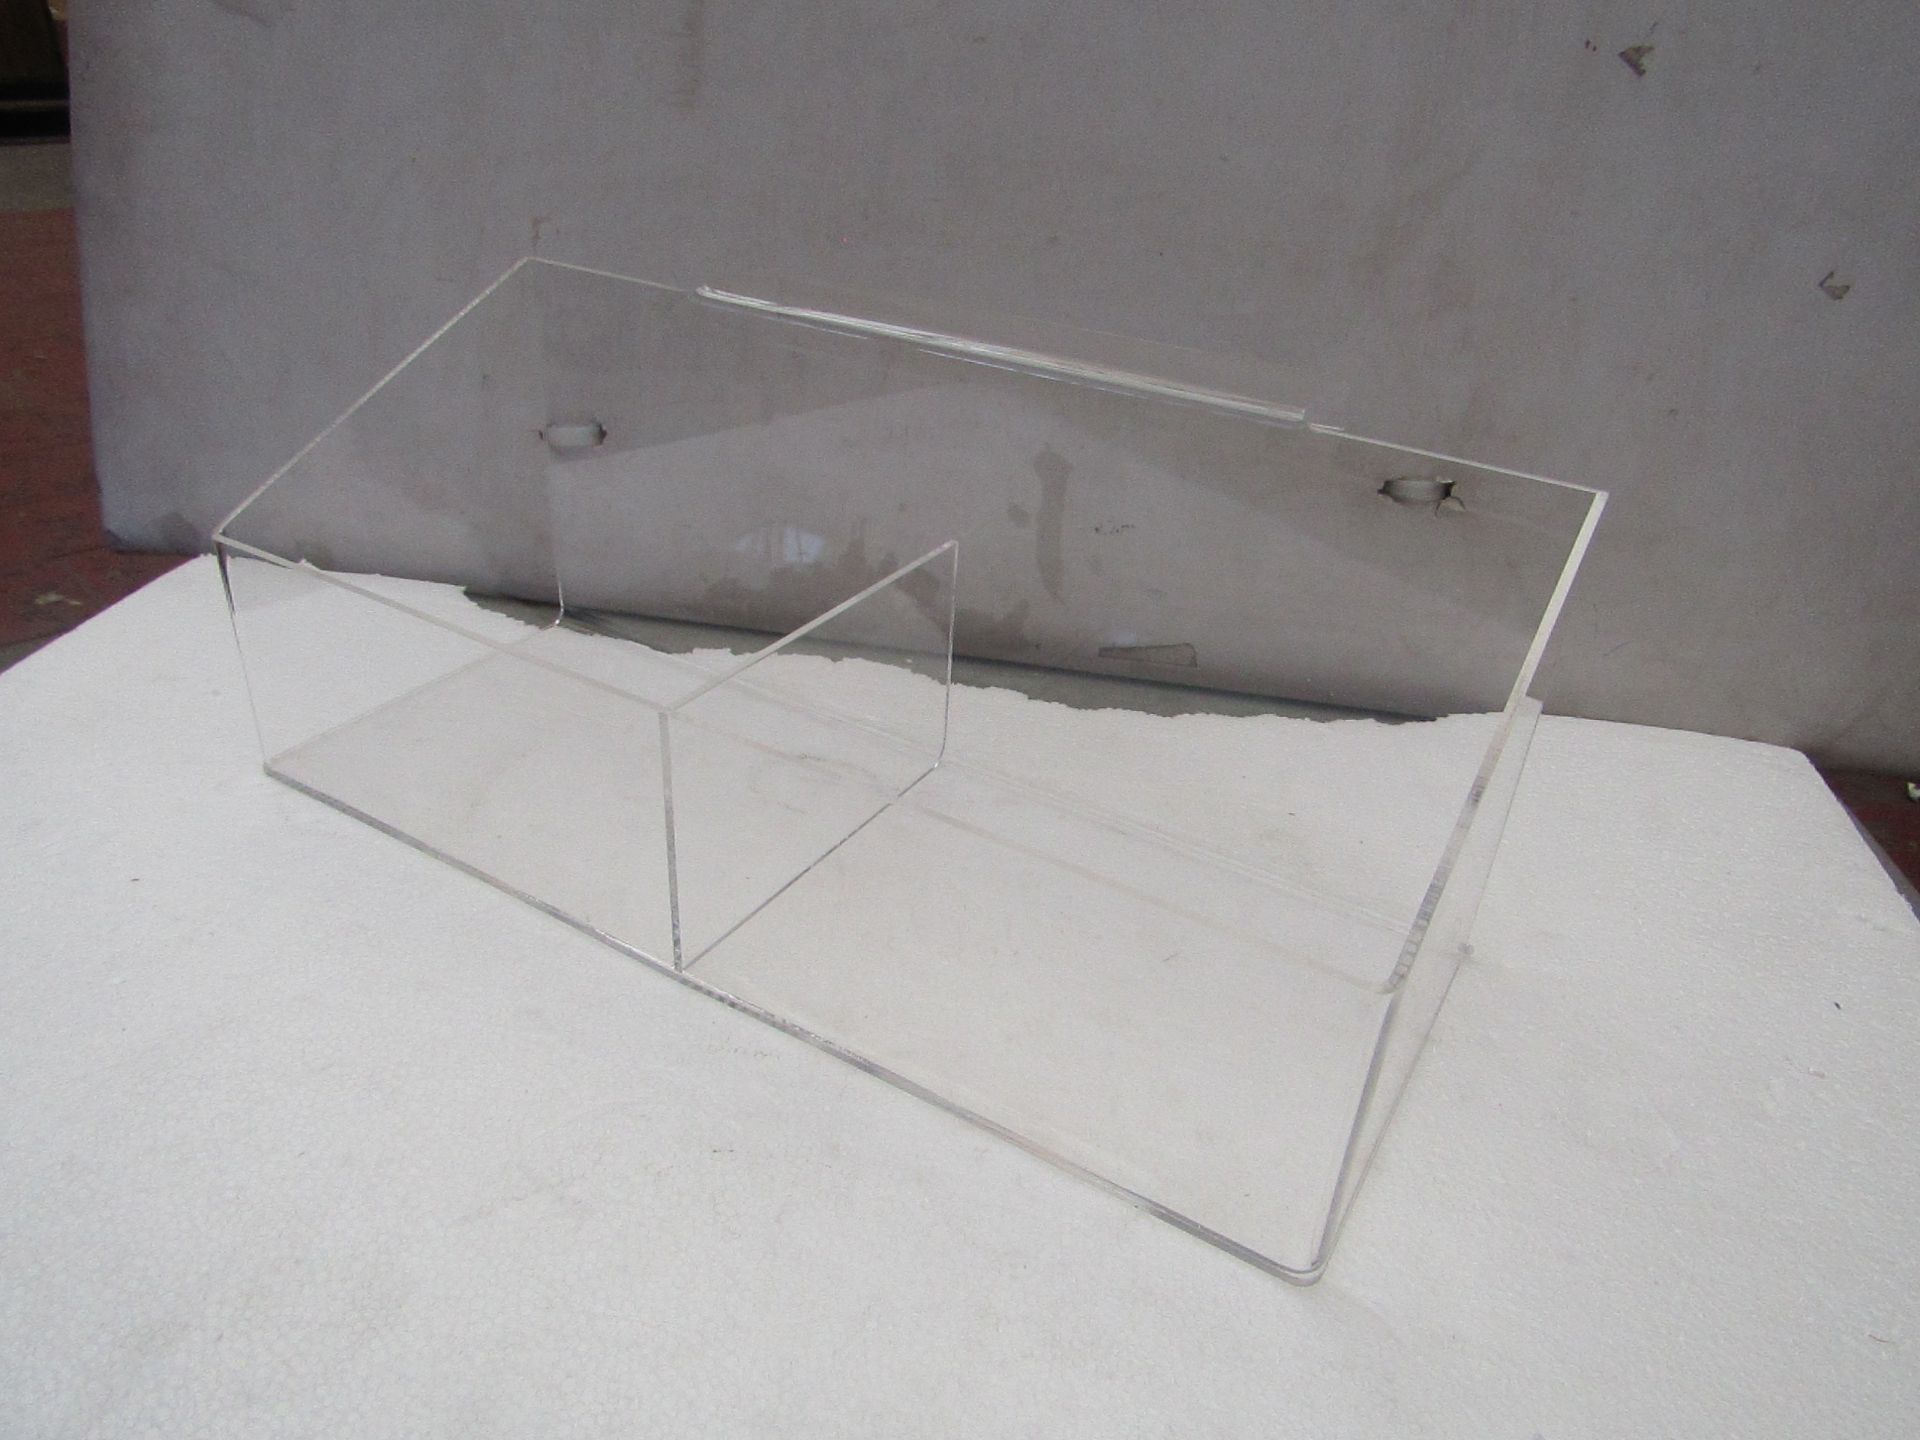 2x Spanx - Transparent Double Bin For Ladder ( 38cm Long X 15cm Tall X 15 Wide ) - Good Condition. - Image 2 of 2